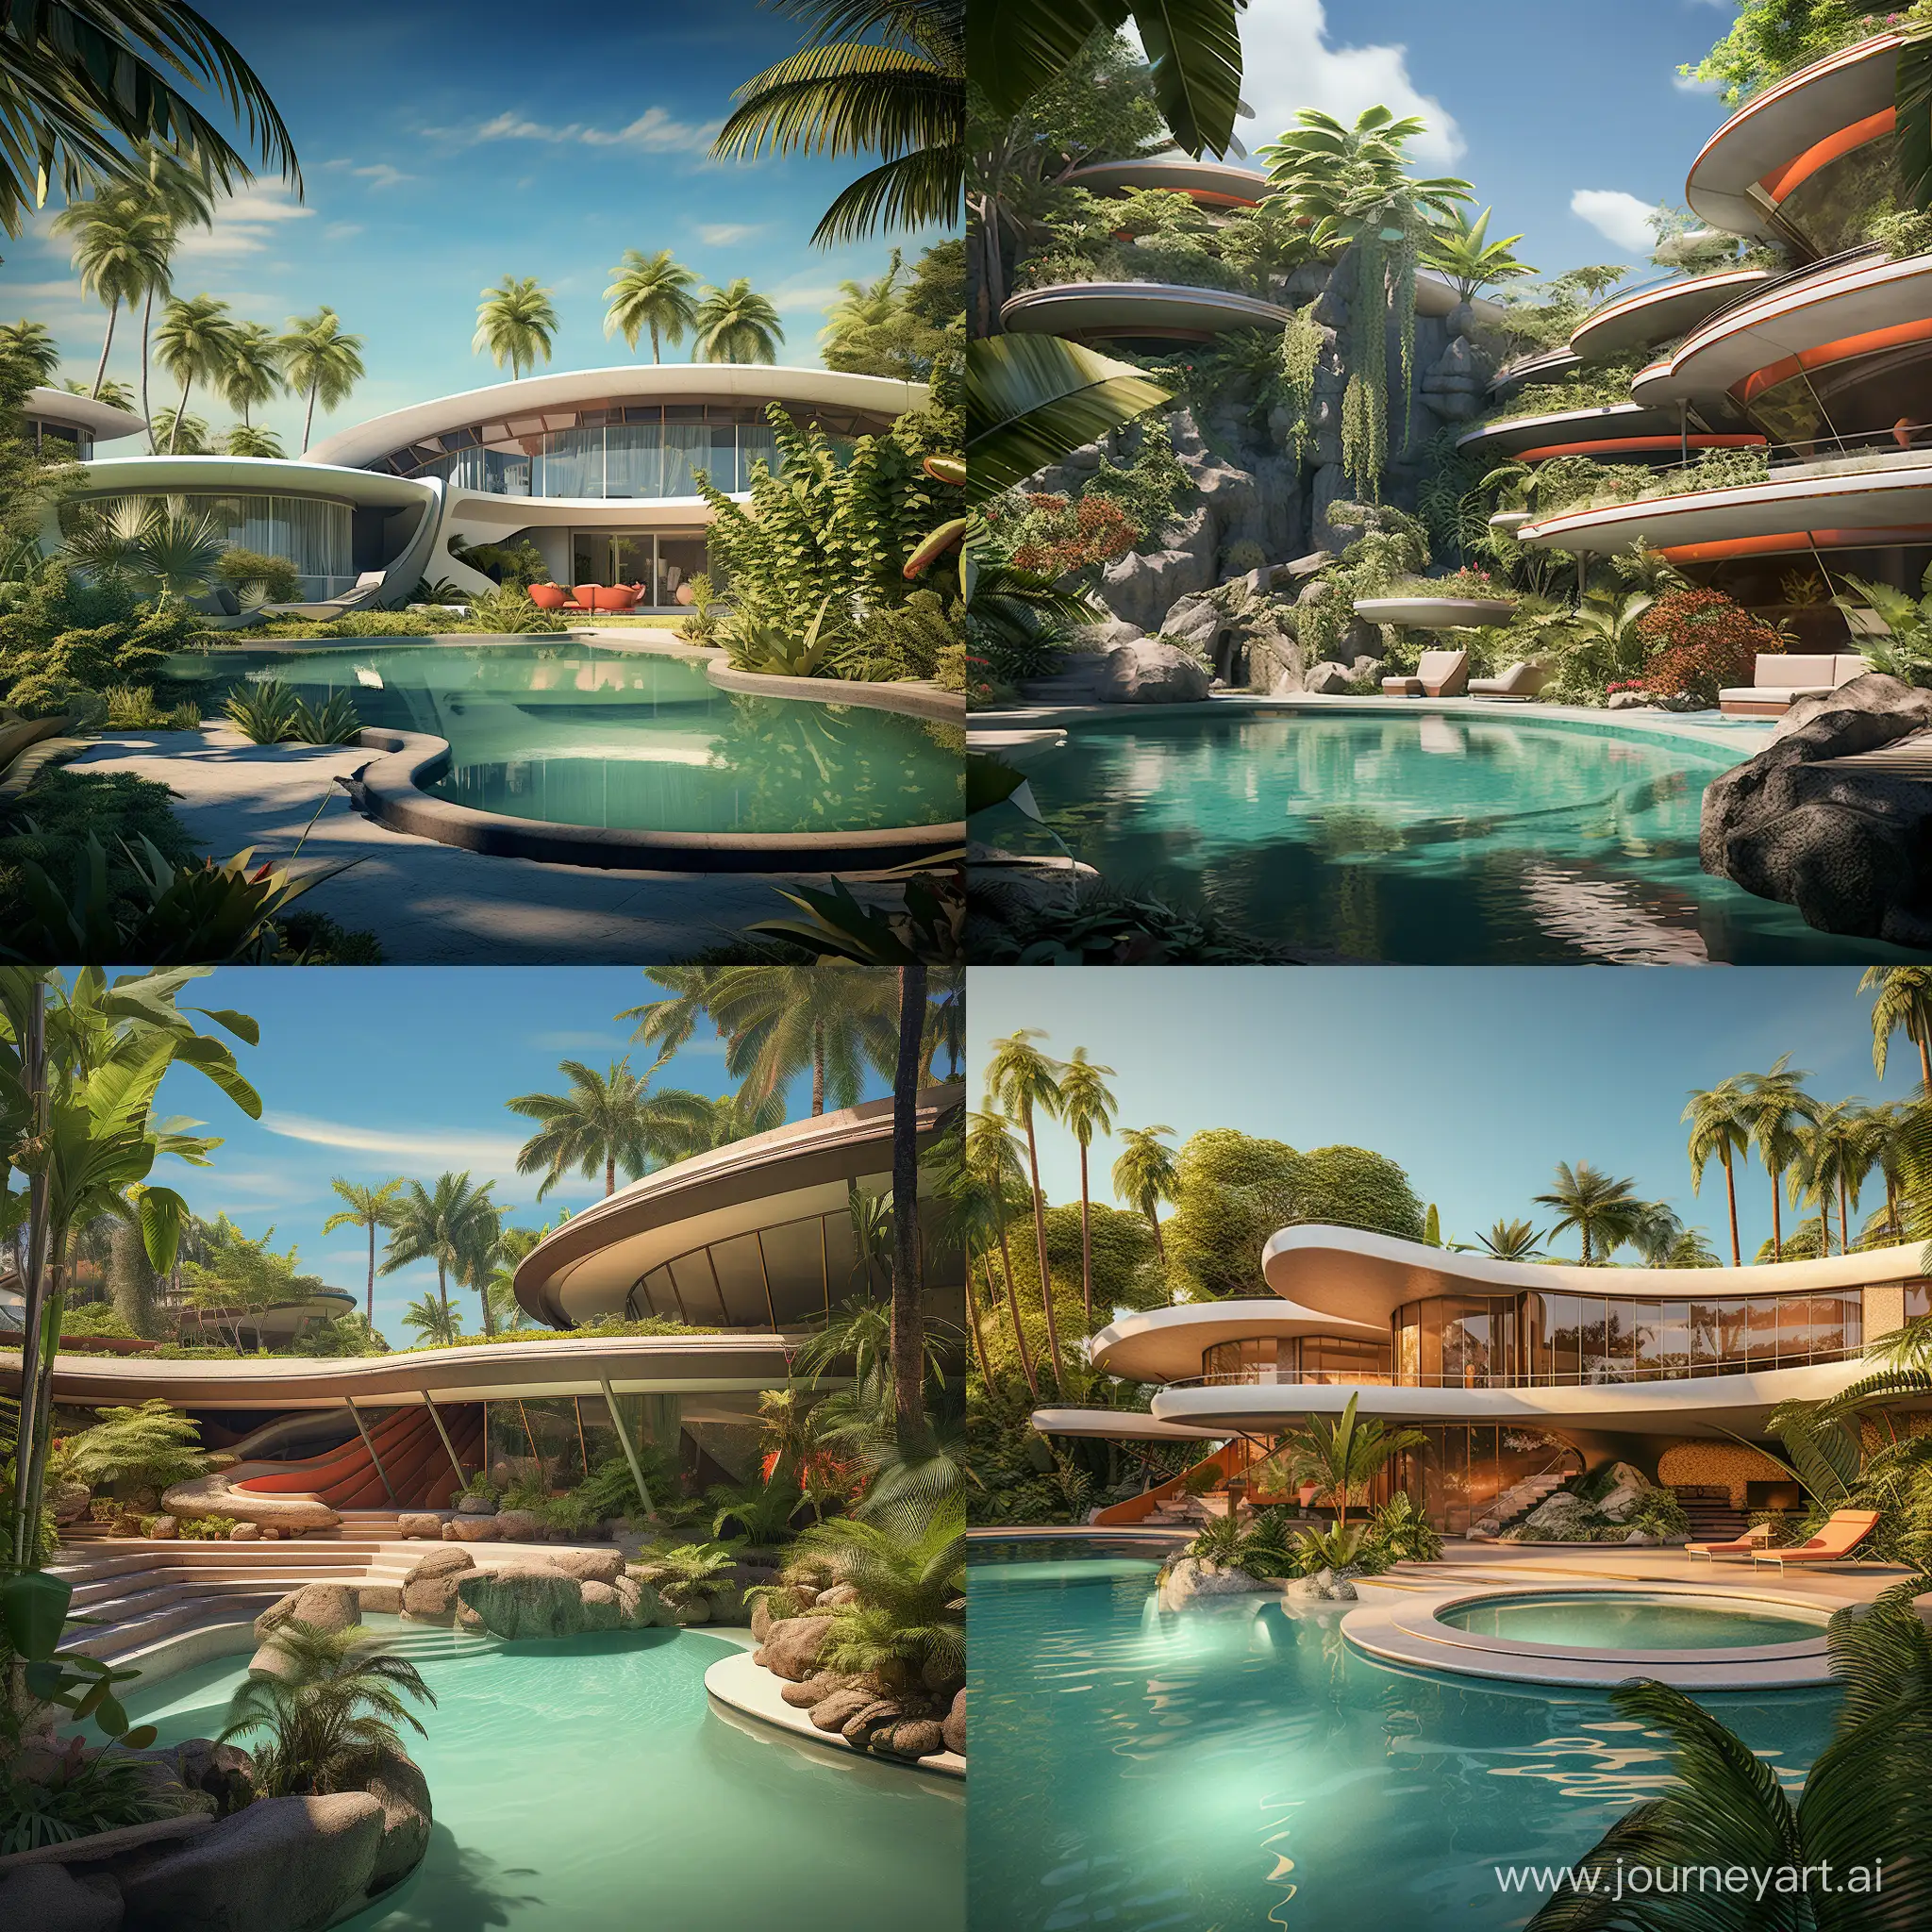 MidCentury-Modern-Architectural-Paradise-in-8K-Quality